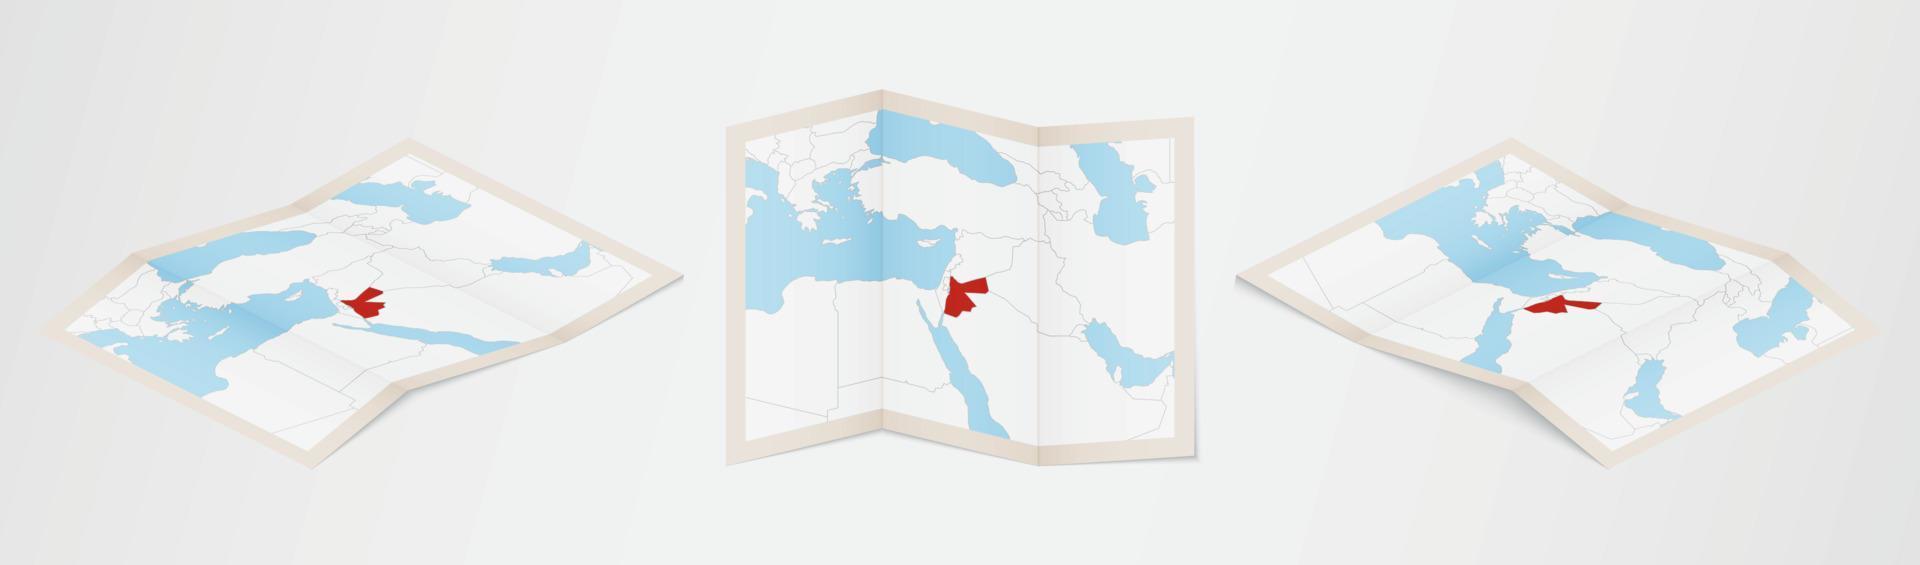 Folded map of Jordan in three different versions. vector